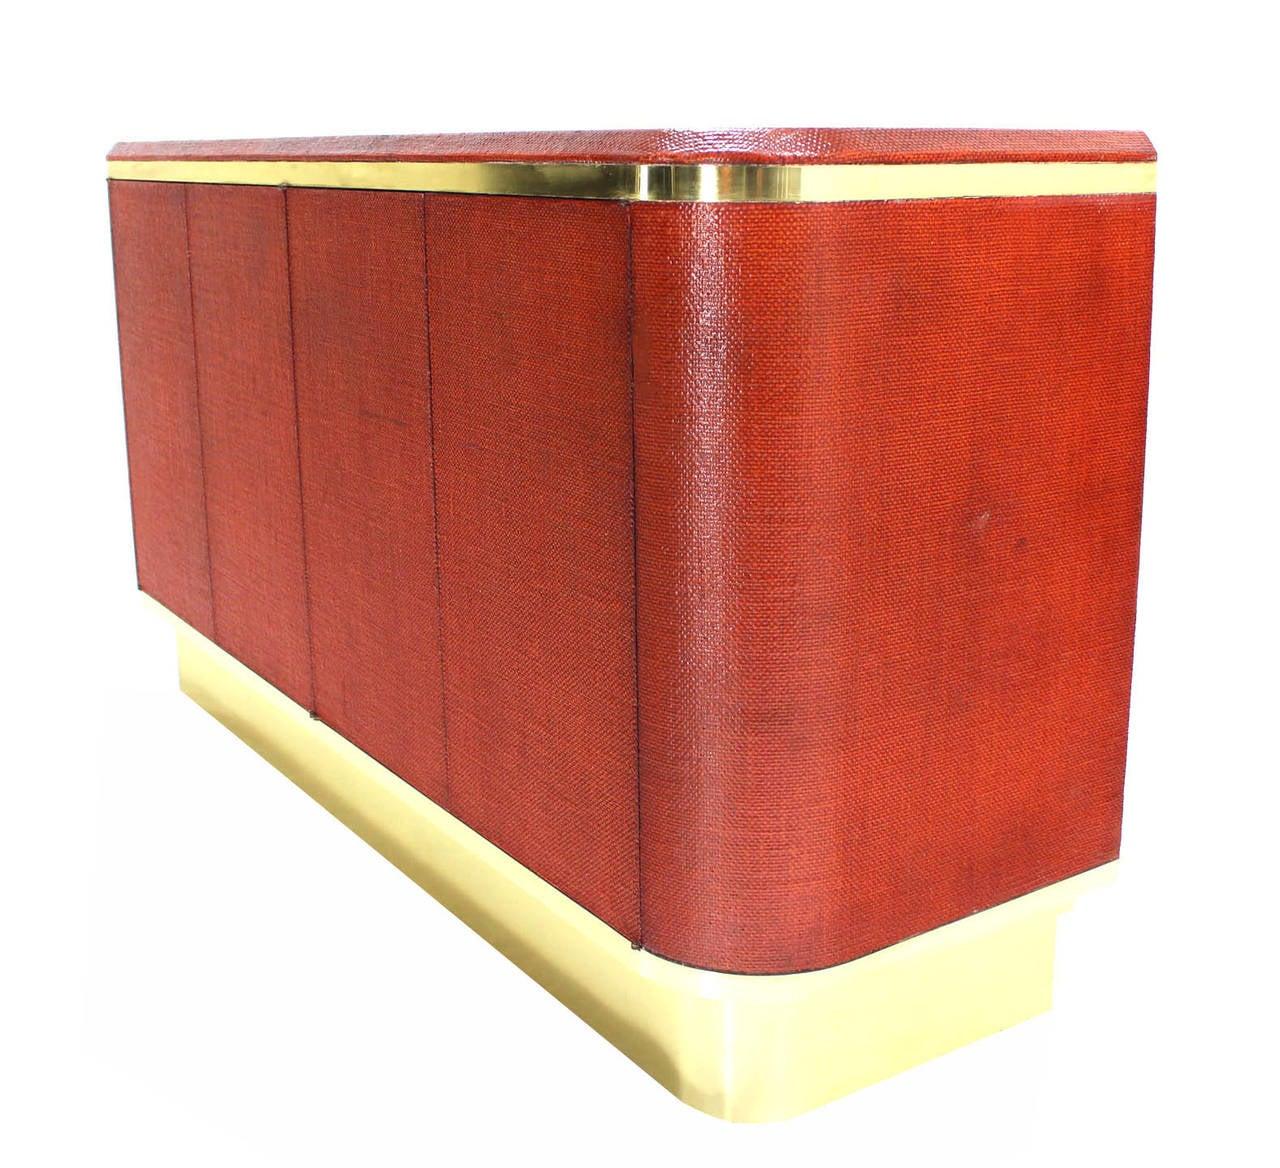 Mid-Century Modern Grass Cloth Brass Credenza 4 Doors Cabinet Sideboard Red Brick Color MINT!